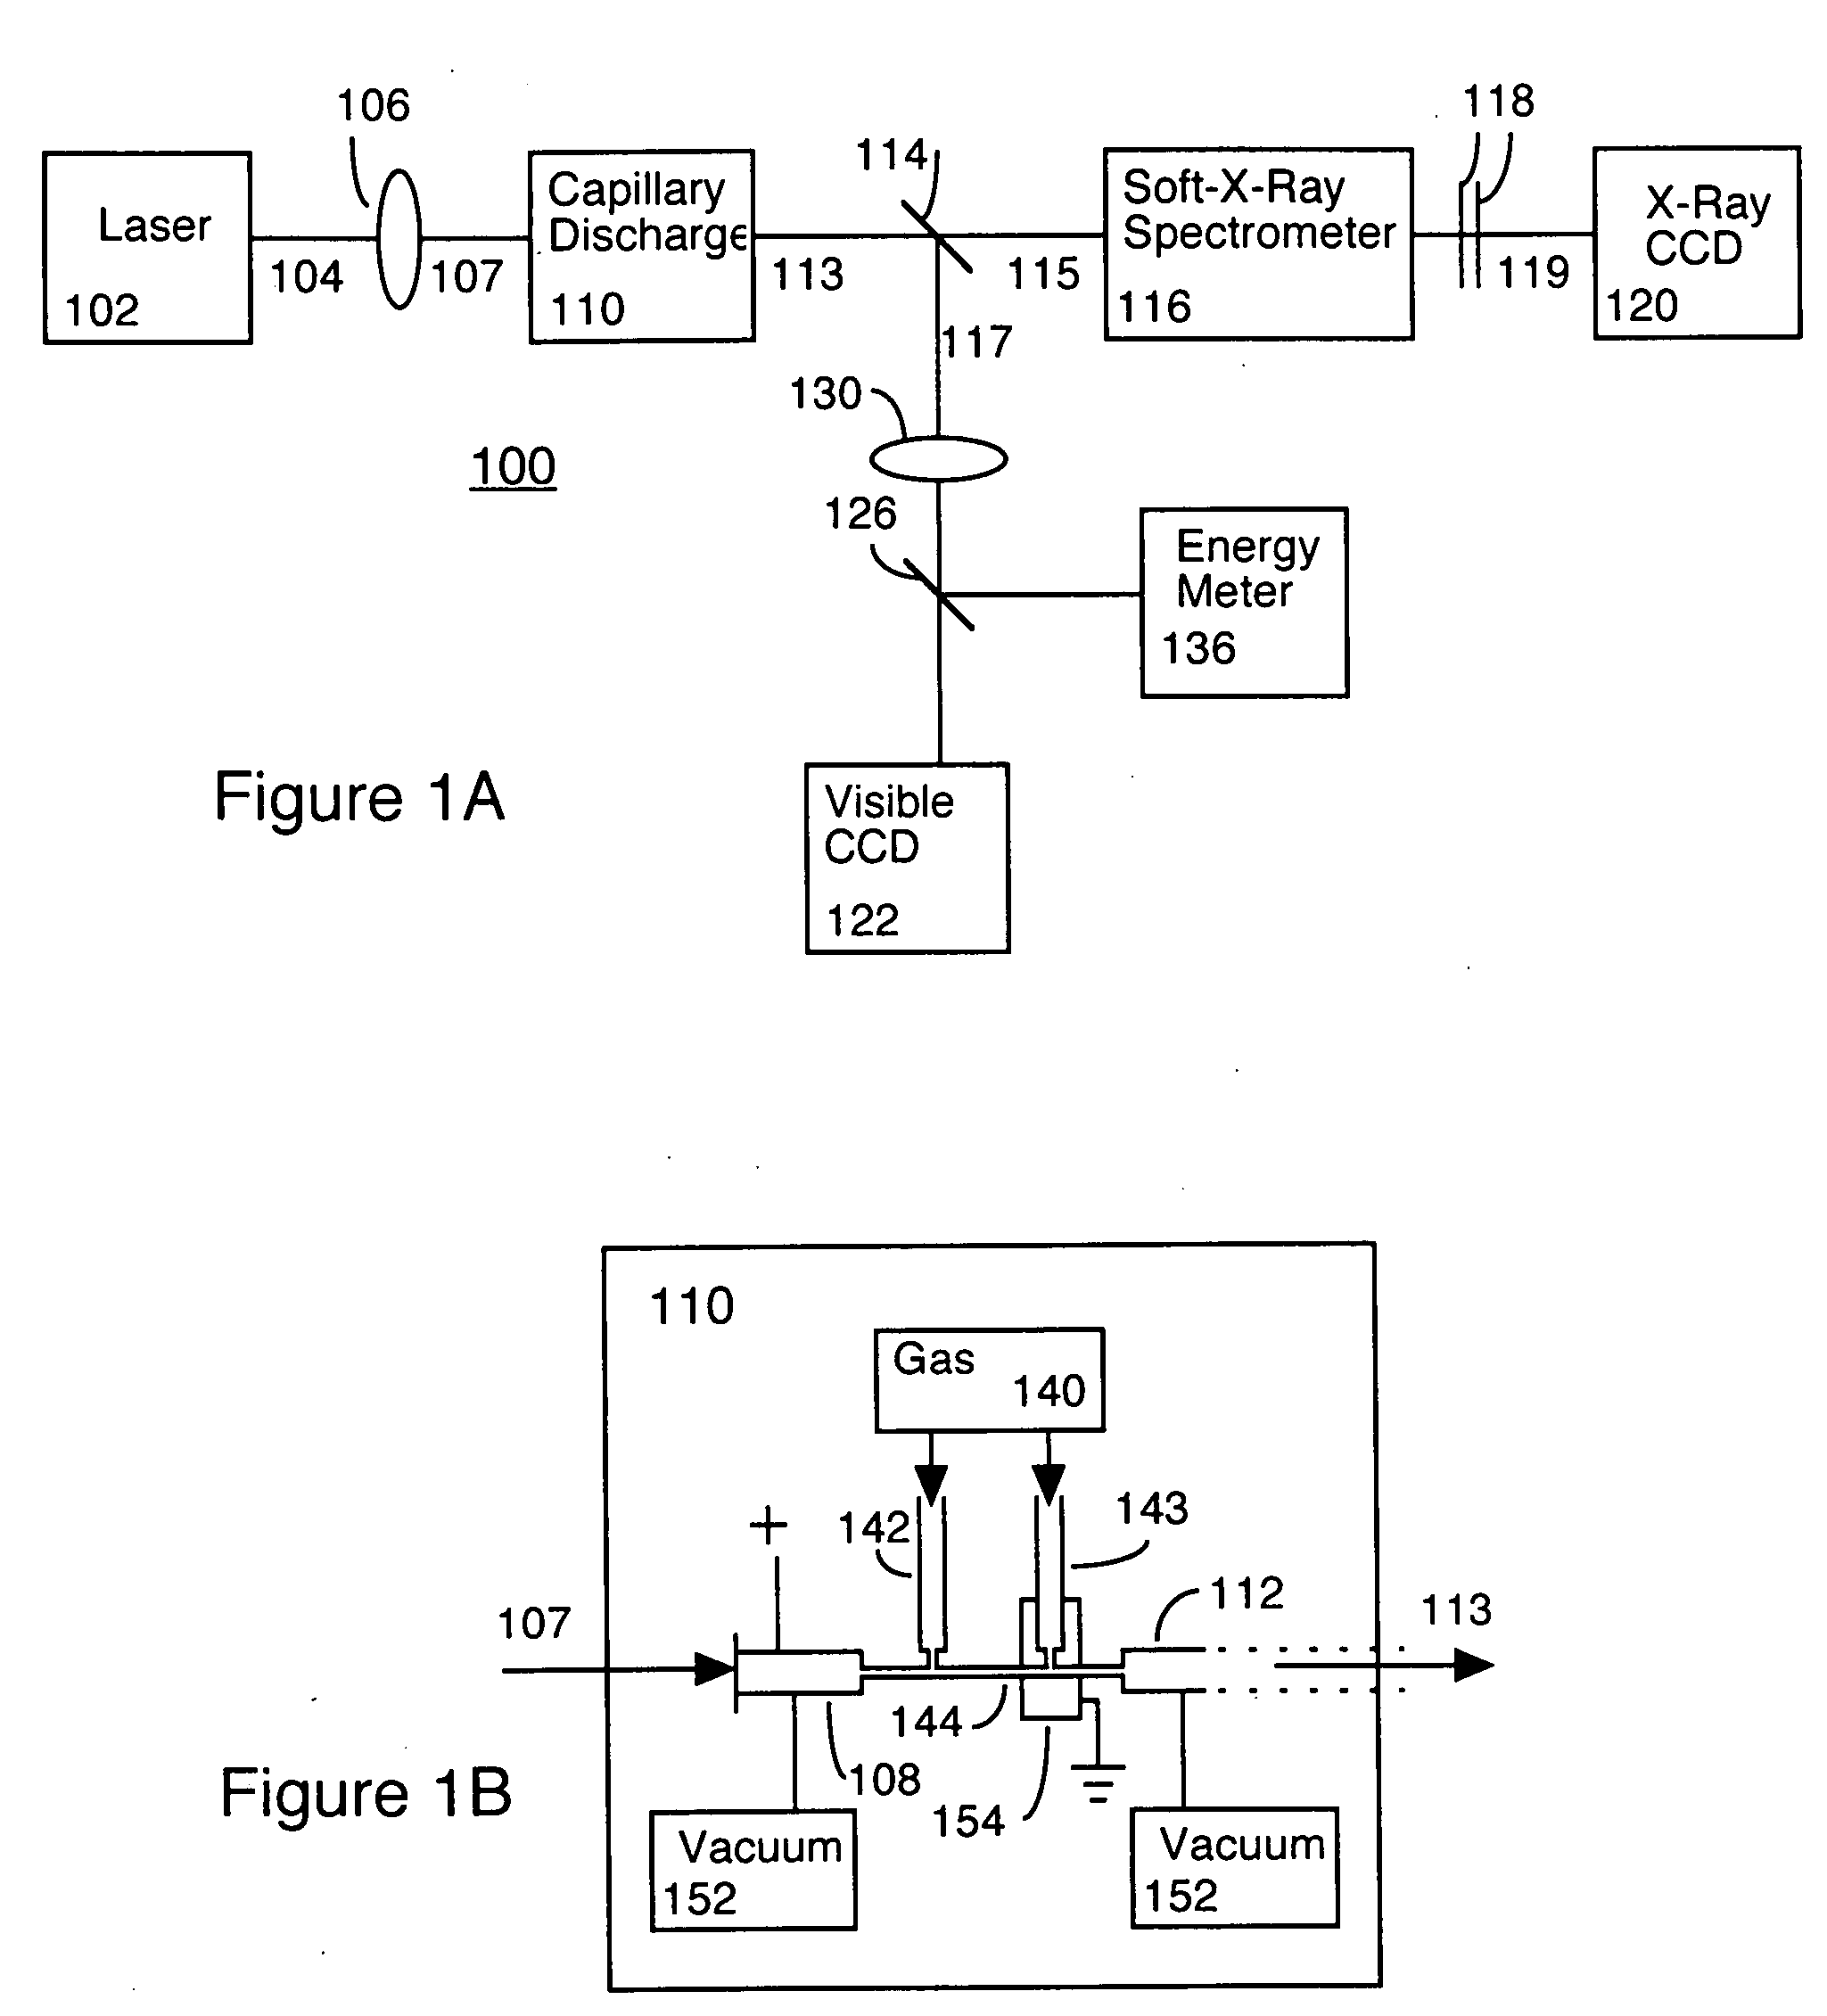 High-order harmonic generation in a capillary discharge